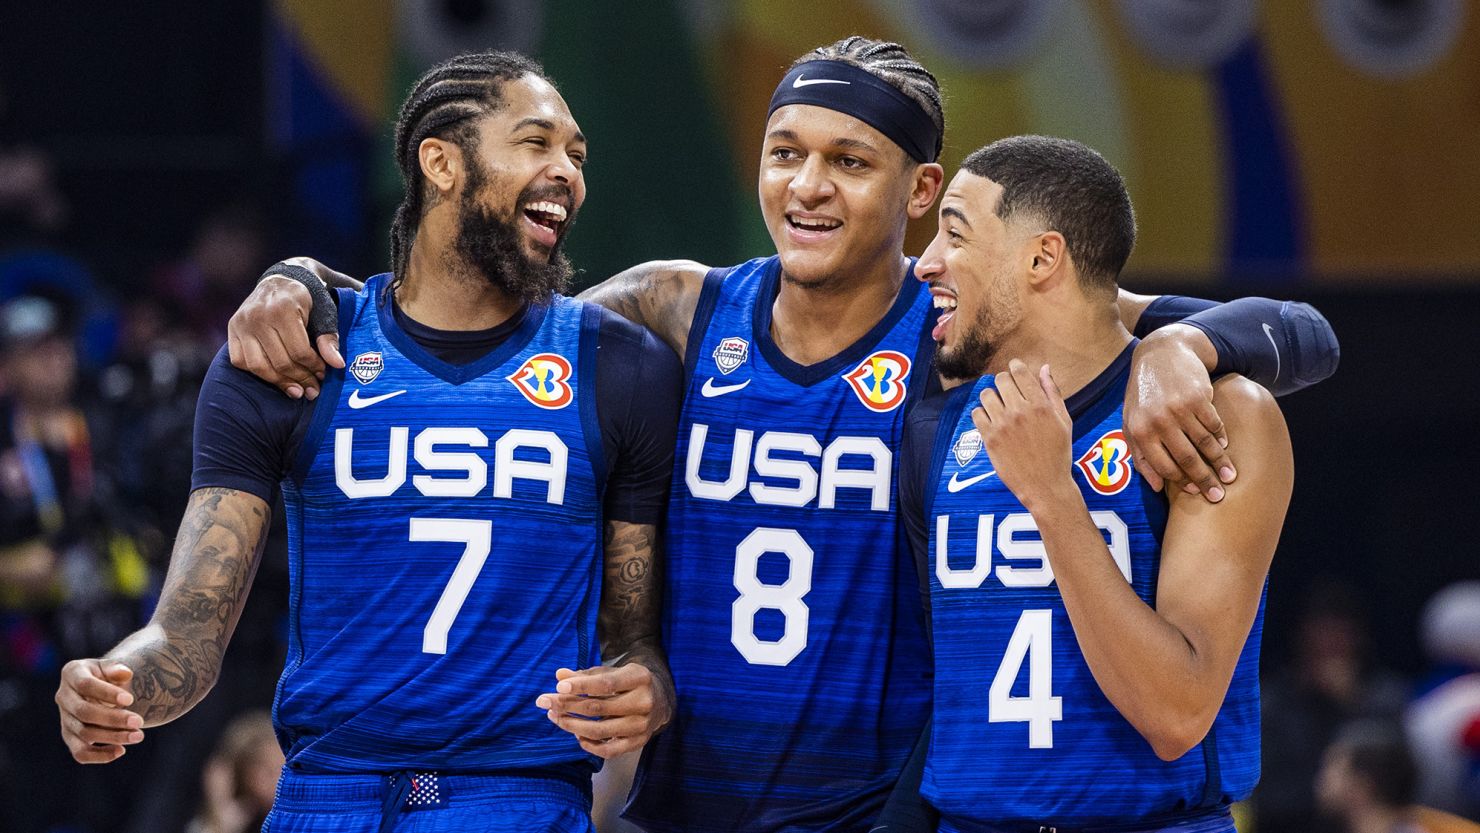 The US cruised past Italy to reach the FIBA Basketball World Cup semifinals.